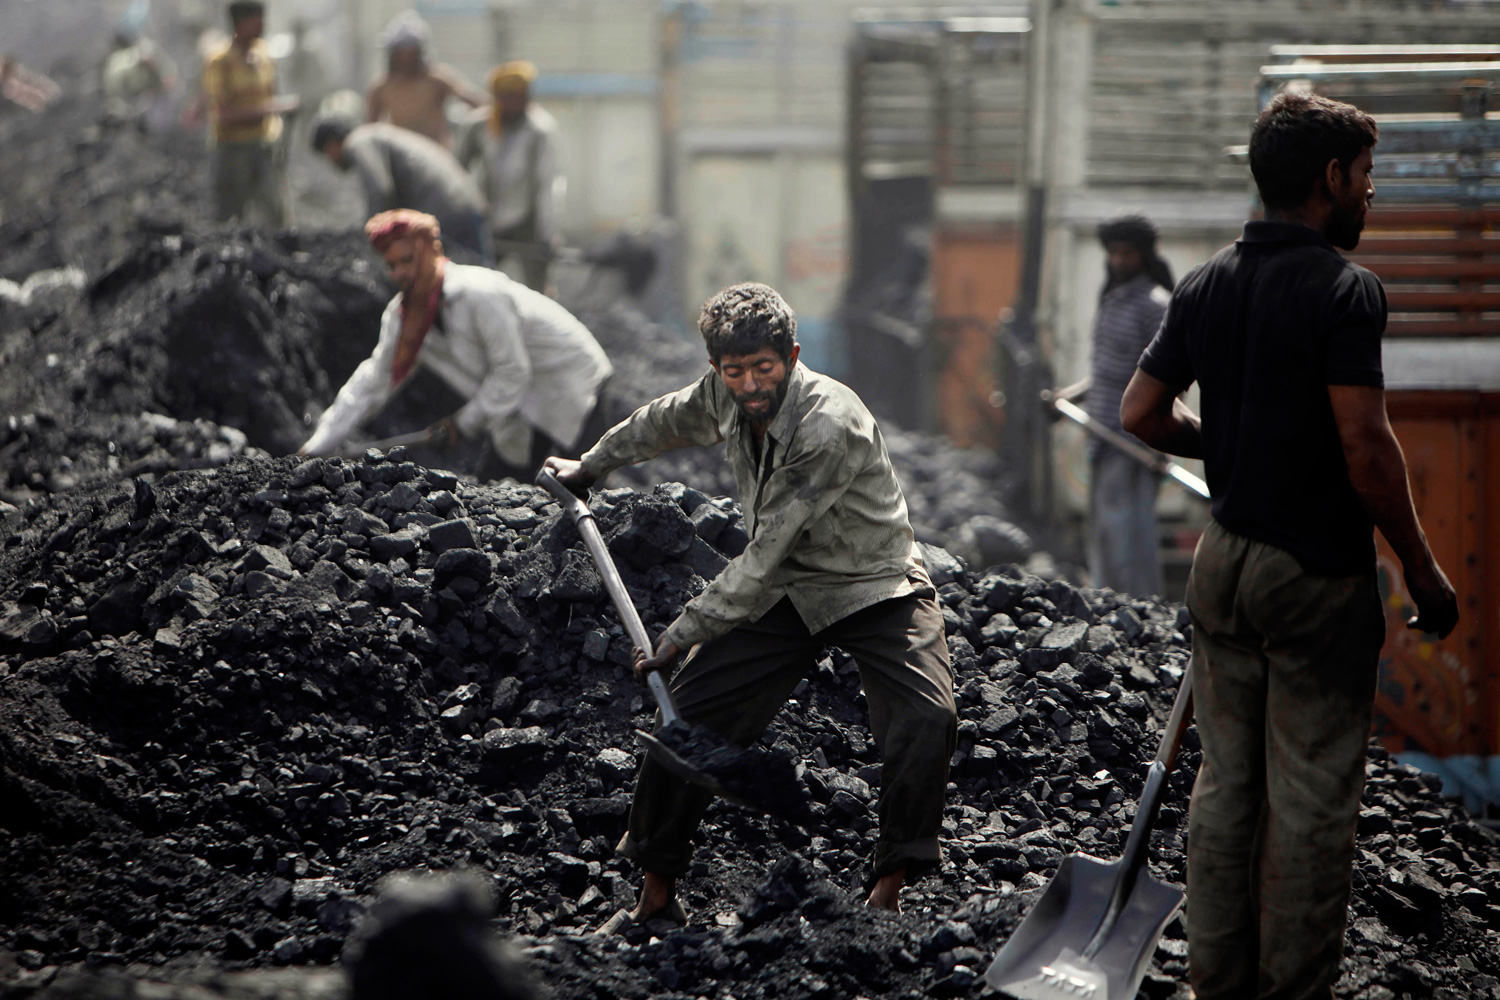 March 23, 2012. Indian laborers load coal onto trucks at a coal depot on the outskirts of Jammu, India.